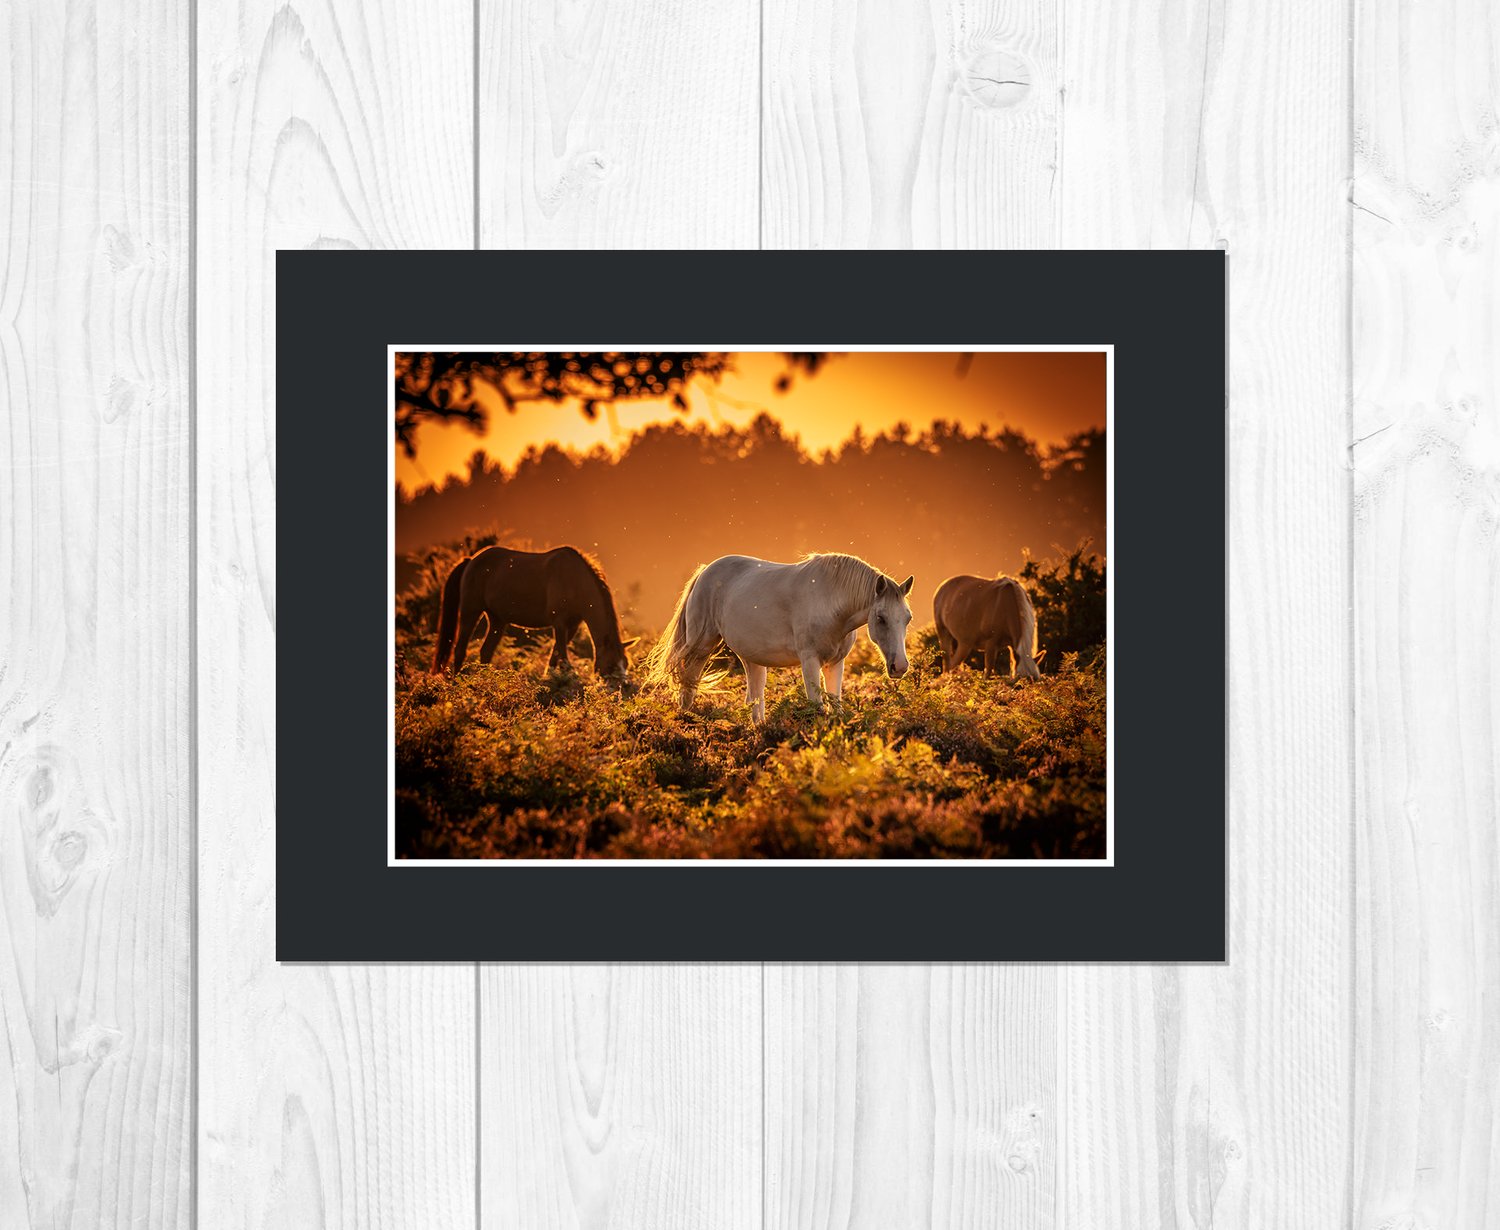 Limited Edition Print: "Sunset Horses"